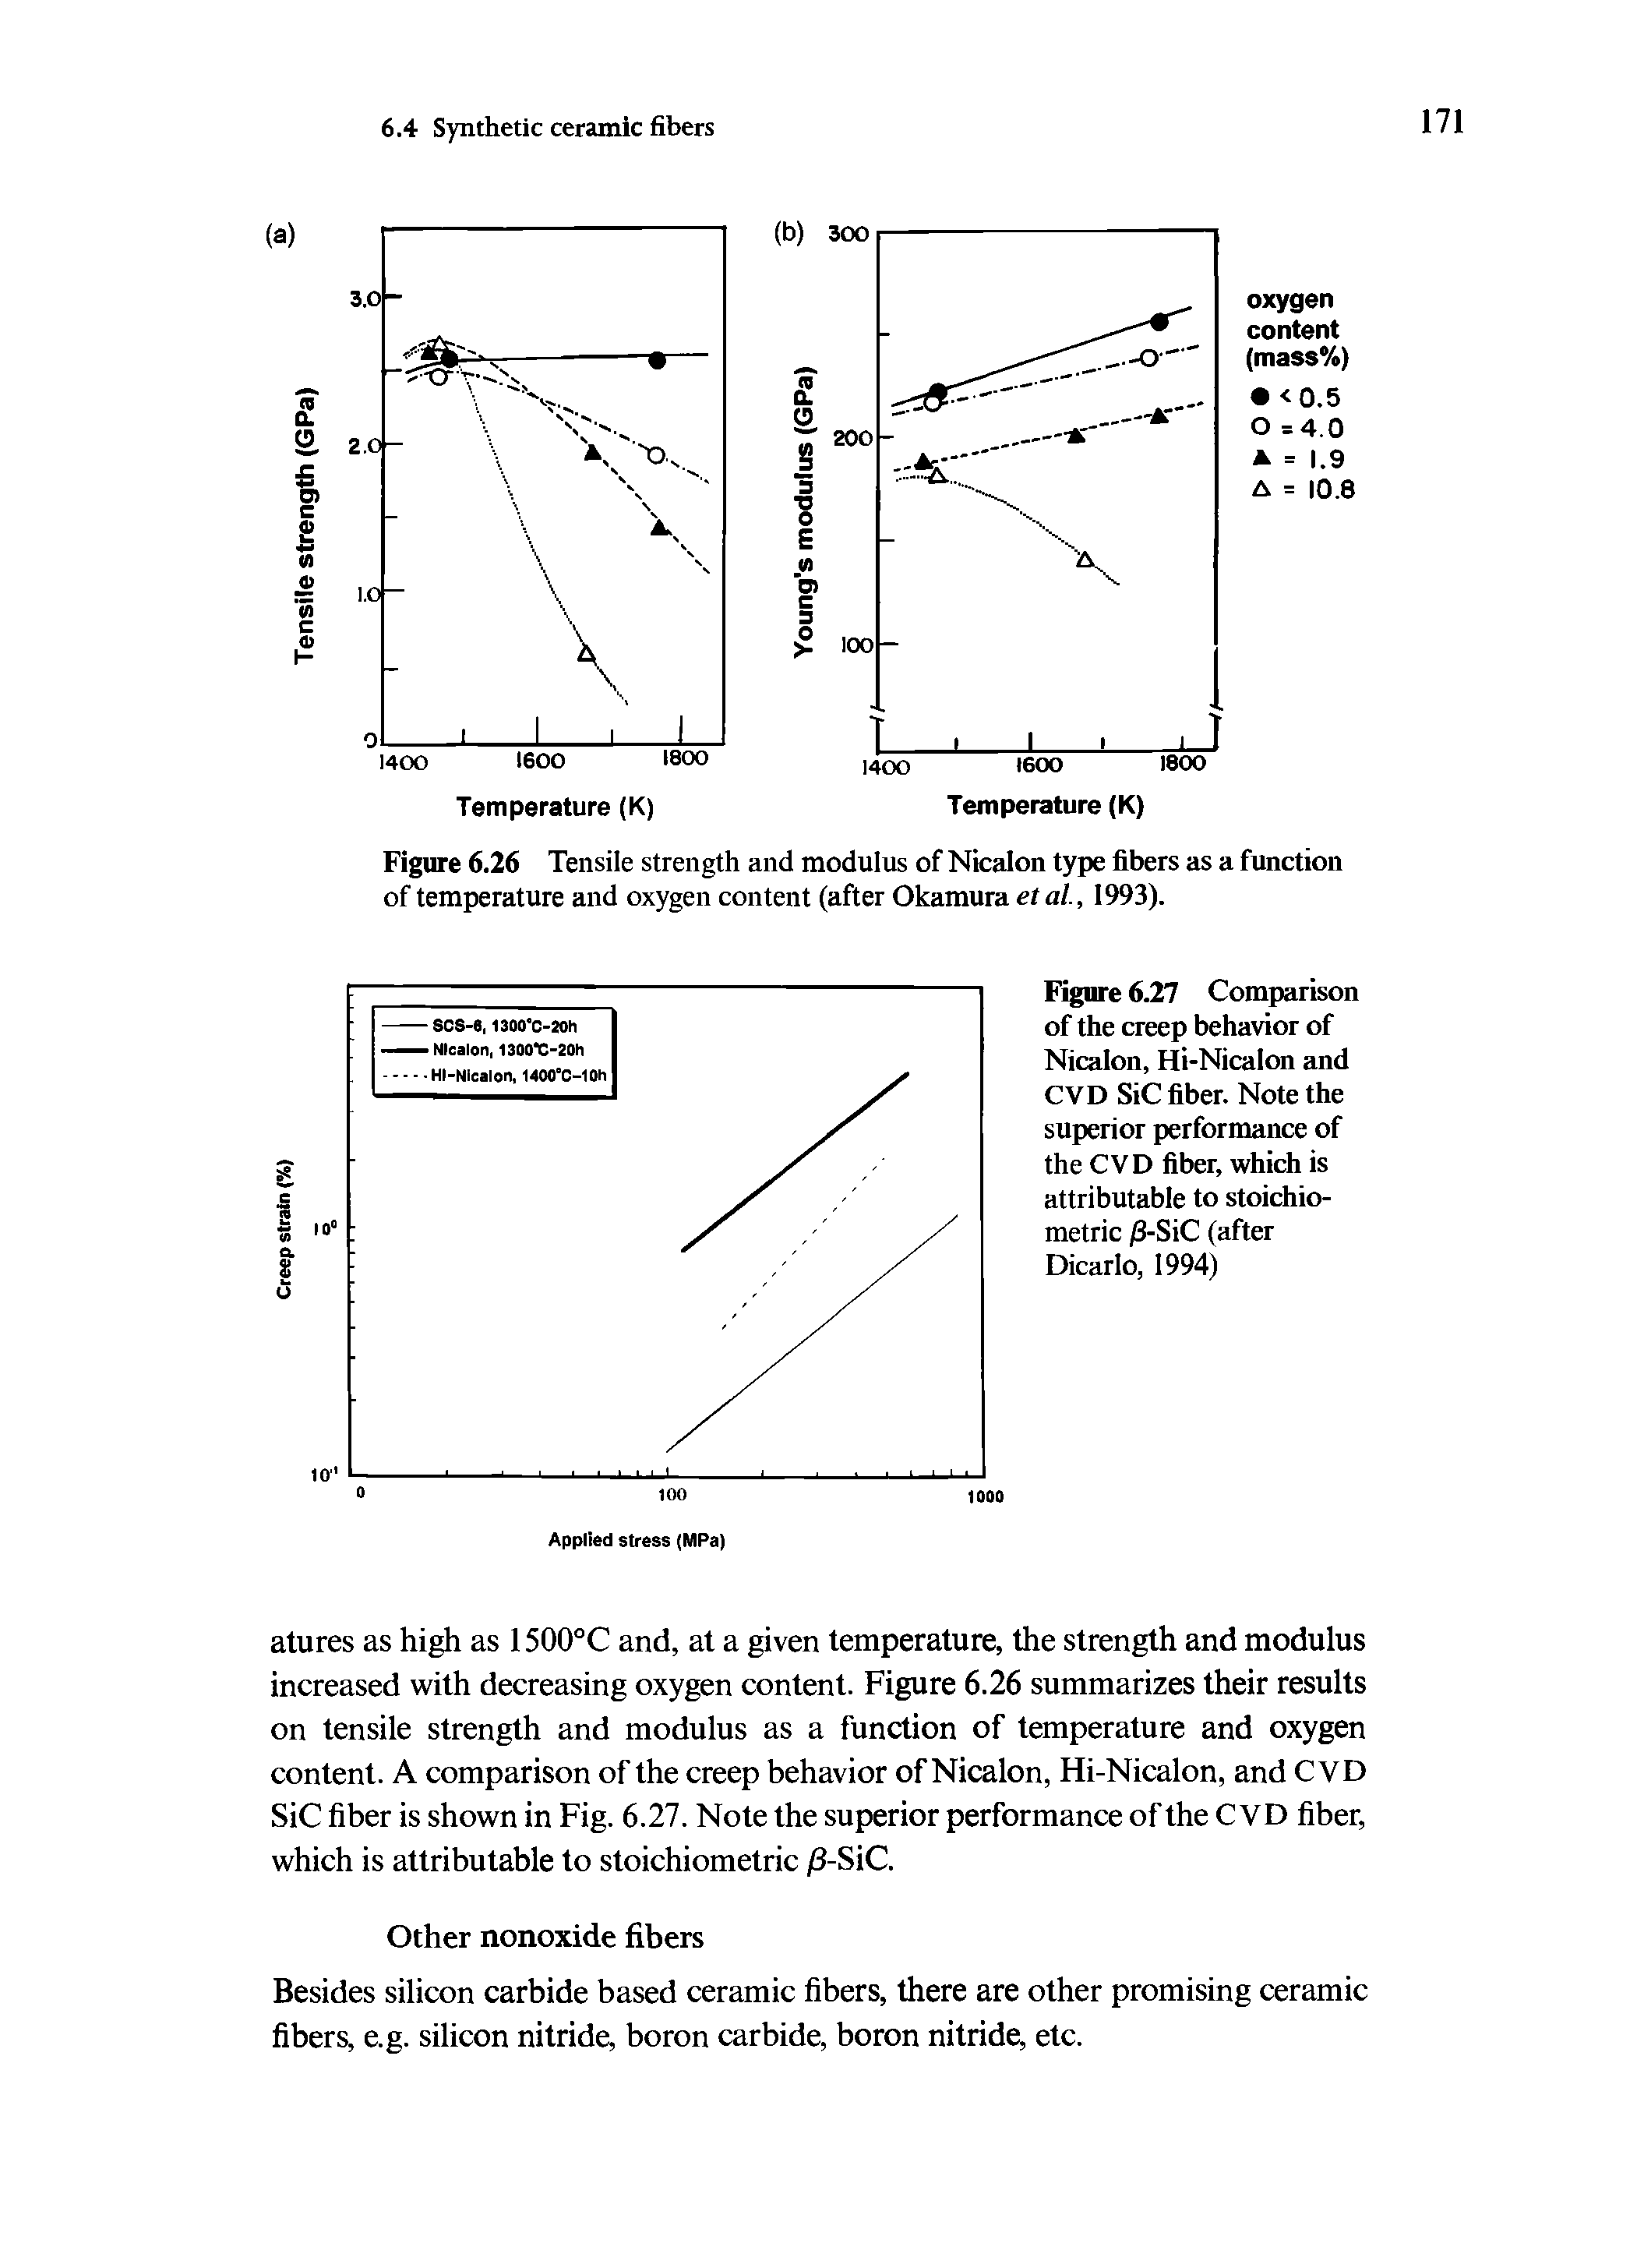 Figure 6.26 Tensile strength and modulus of Nicalon type fibers as a function of temperature and oxygen content (after Okamura etal, 1993).